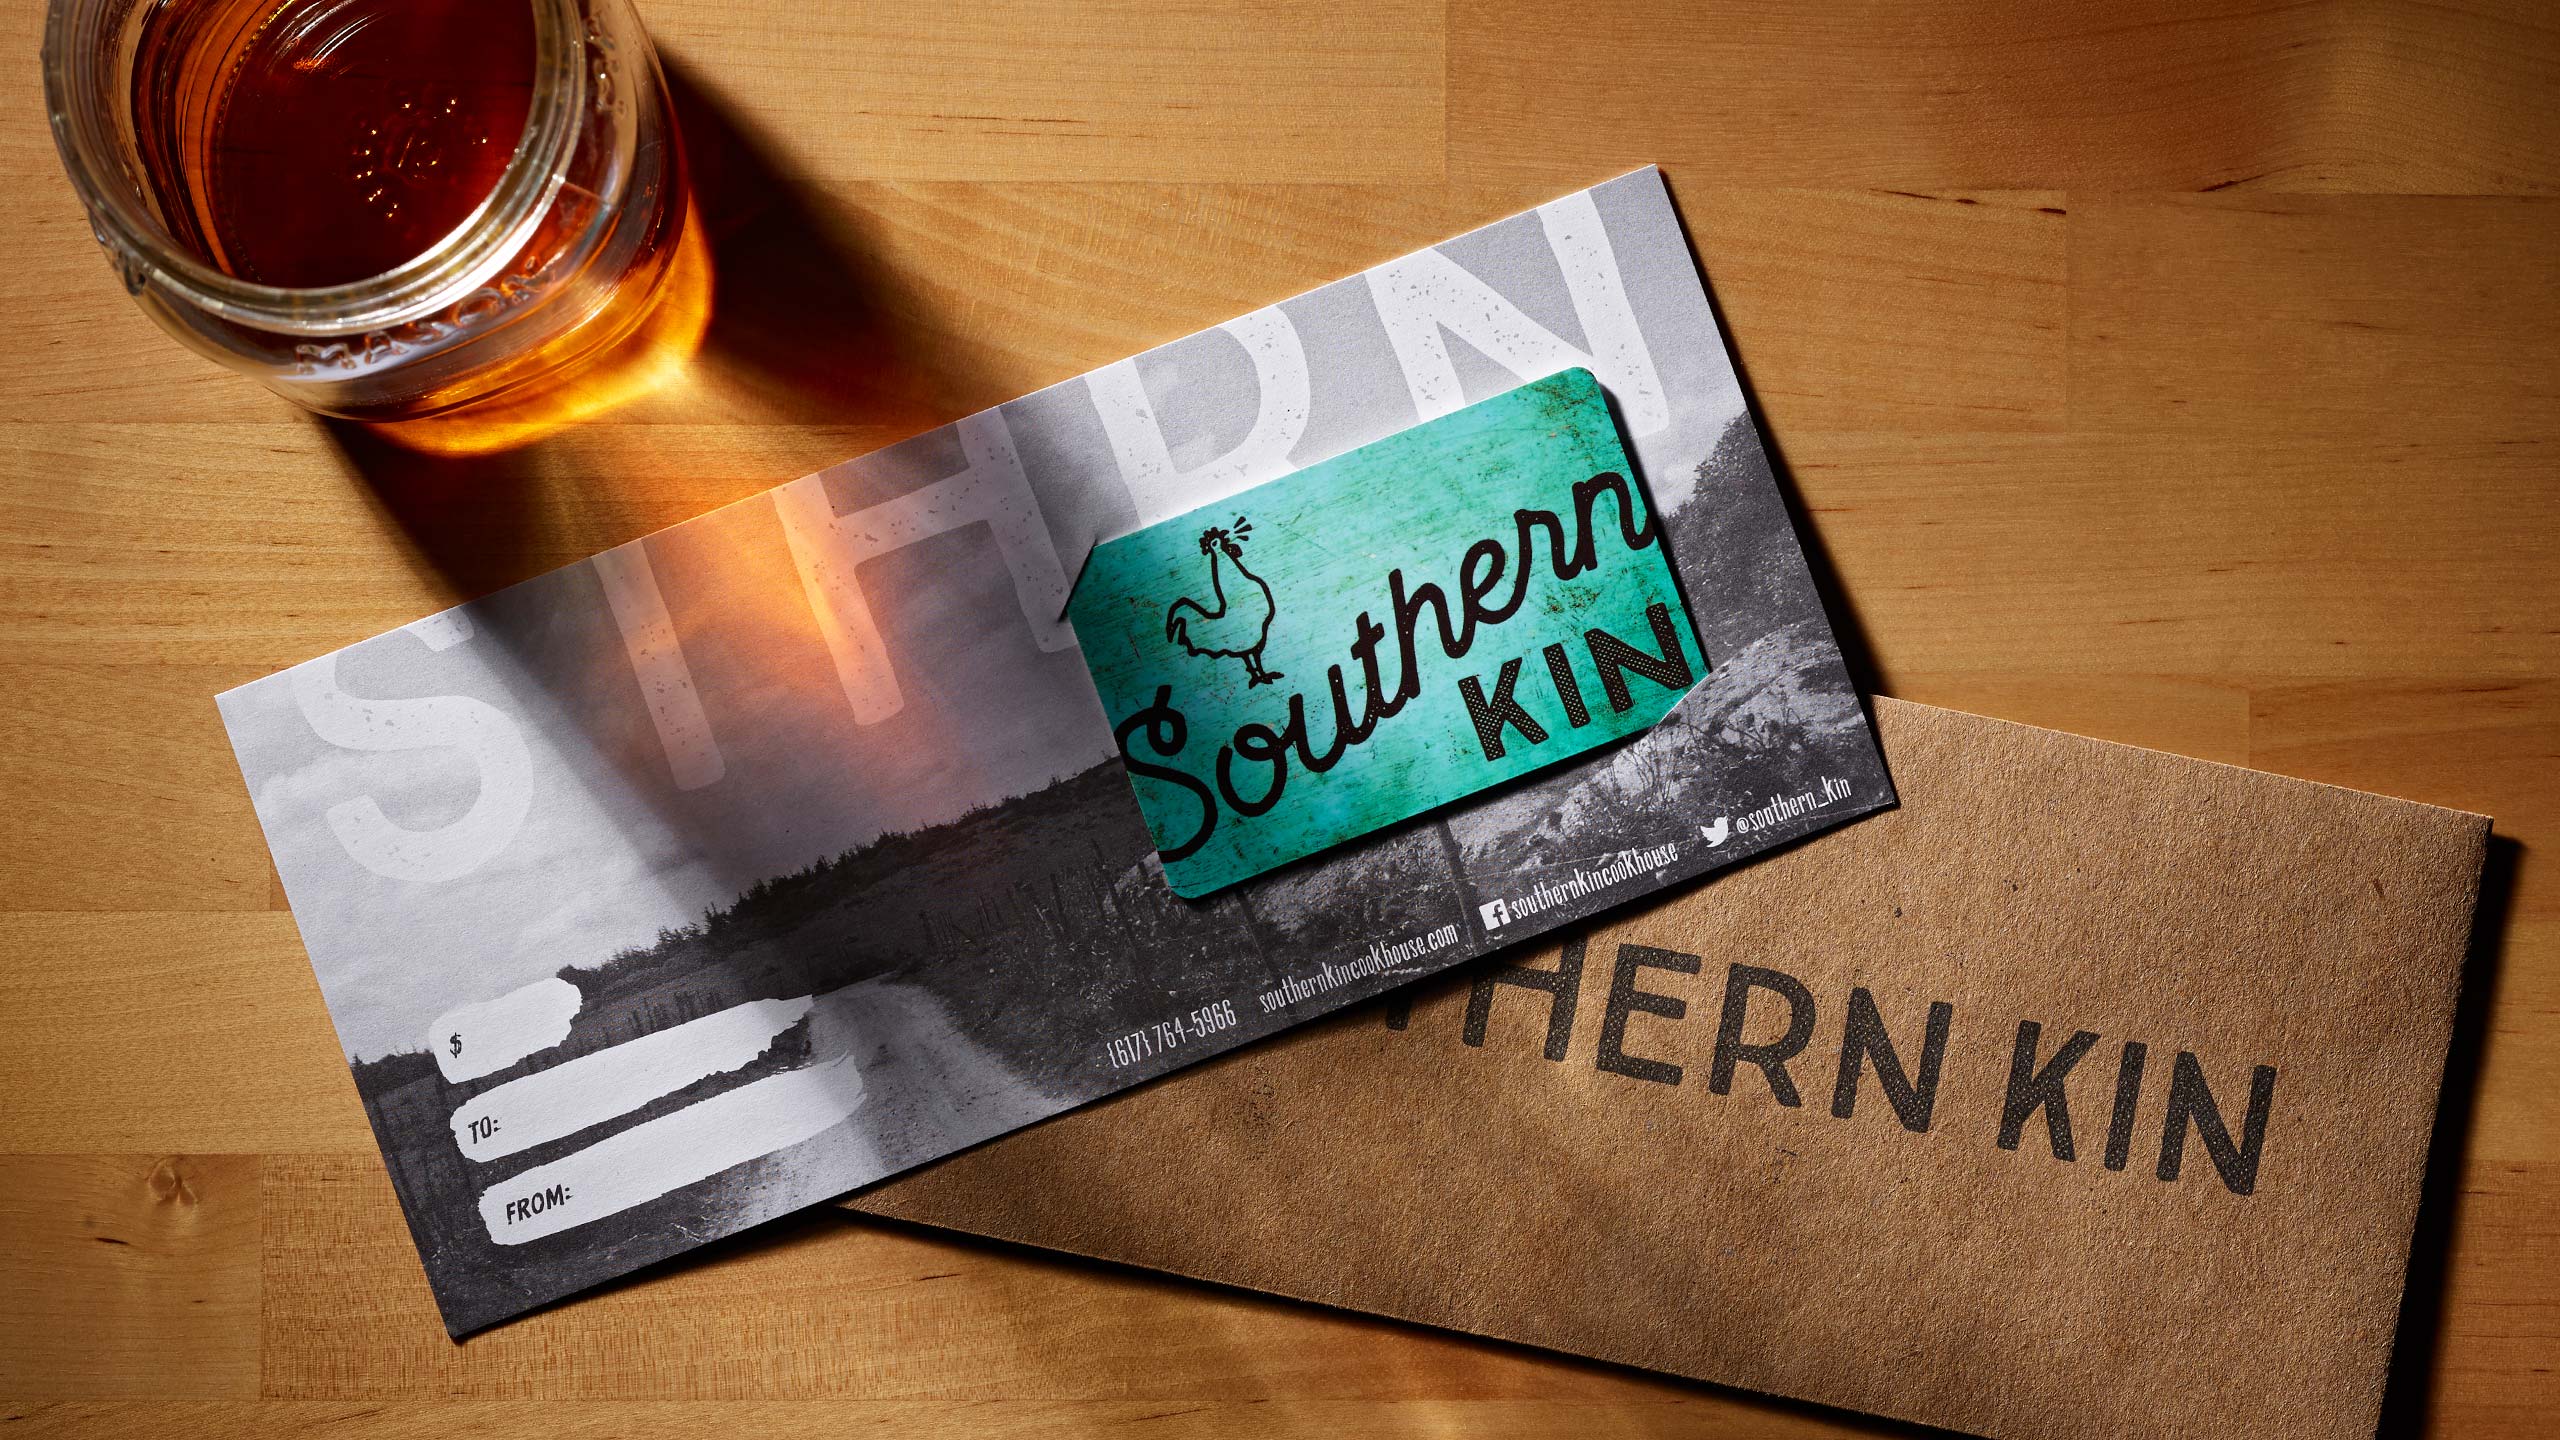 Southern Kin Cookhouse gift card collateral